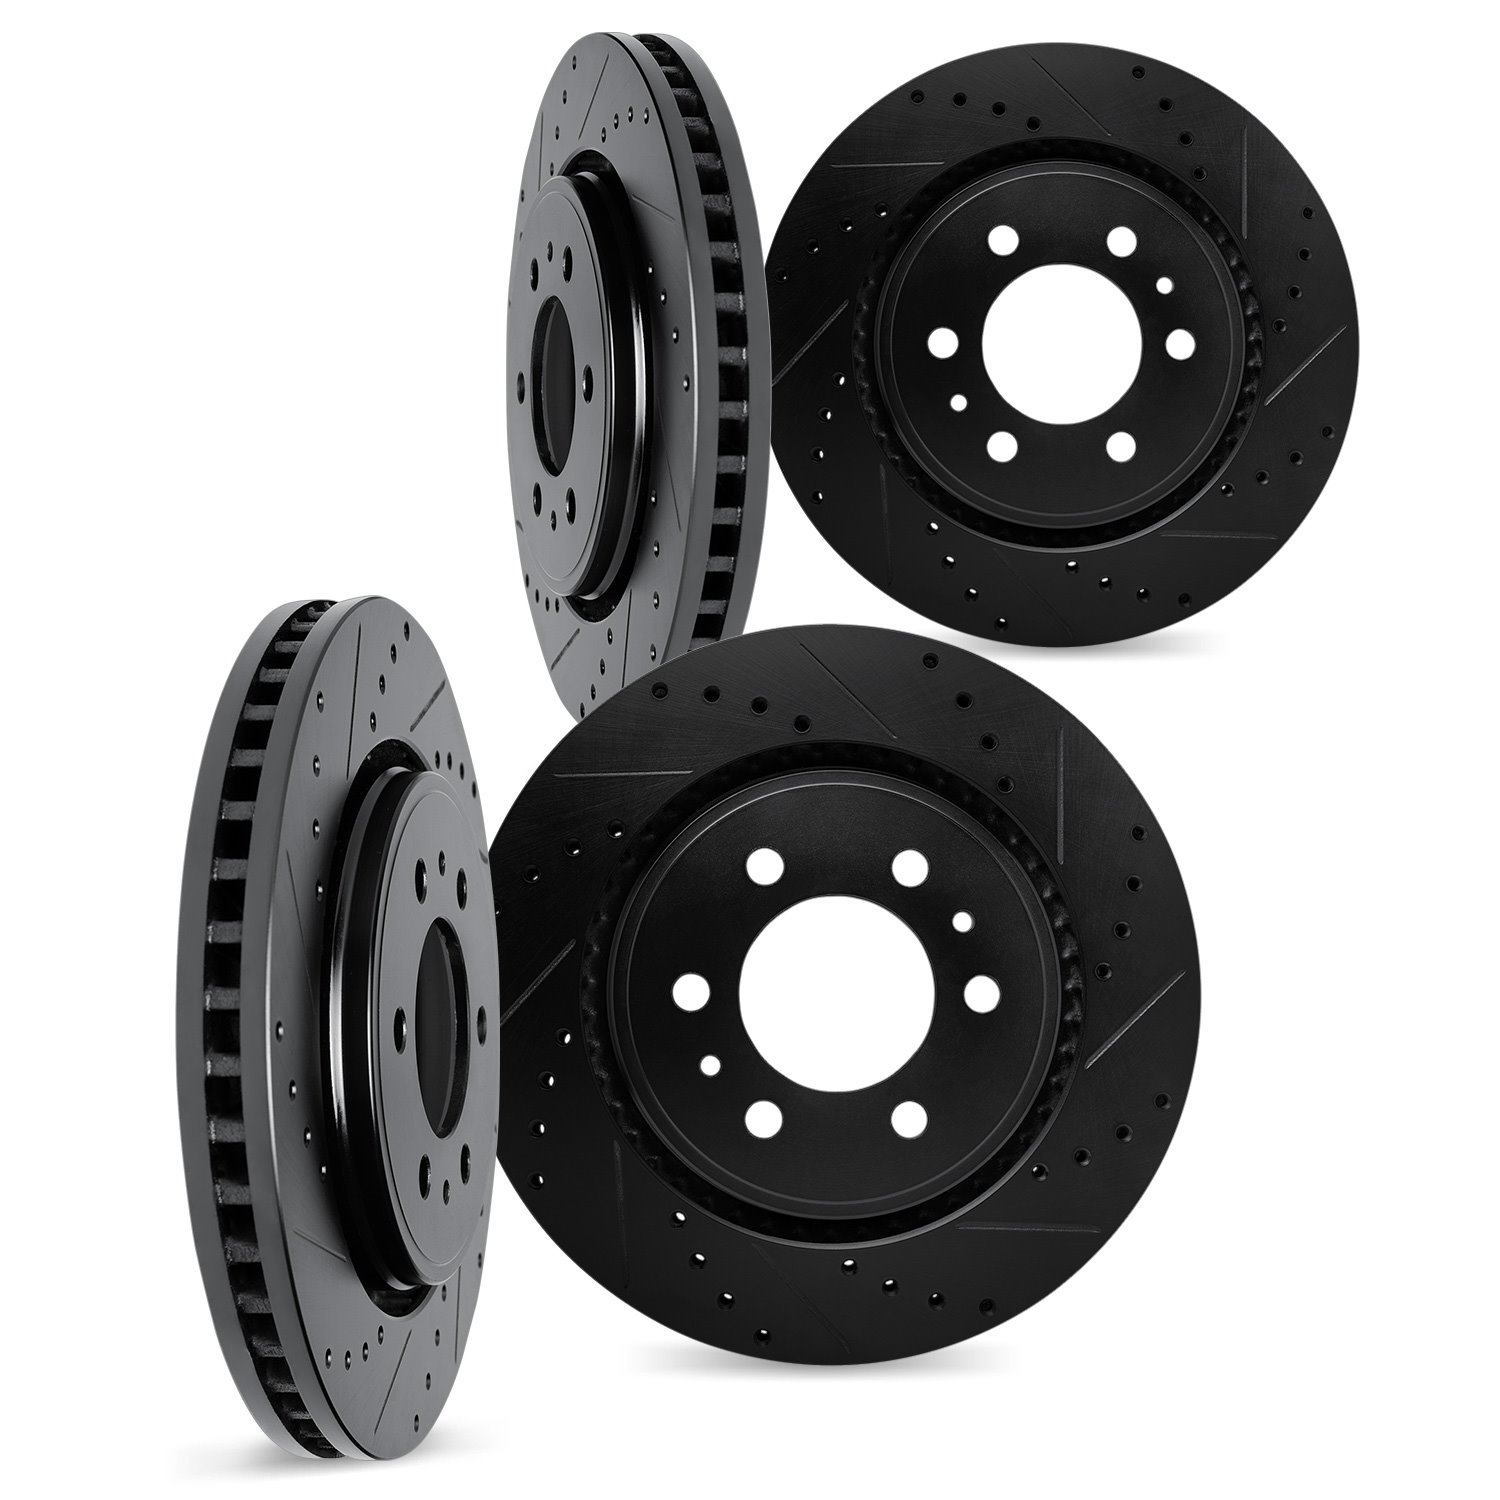 8004-47107 Drilled/Slotted Brake Rotors [Black], Fits Select GM, Position: Front and Rear